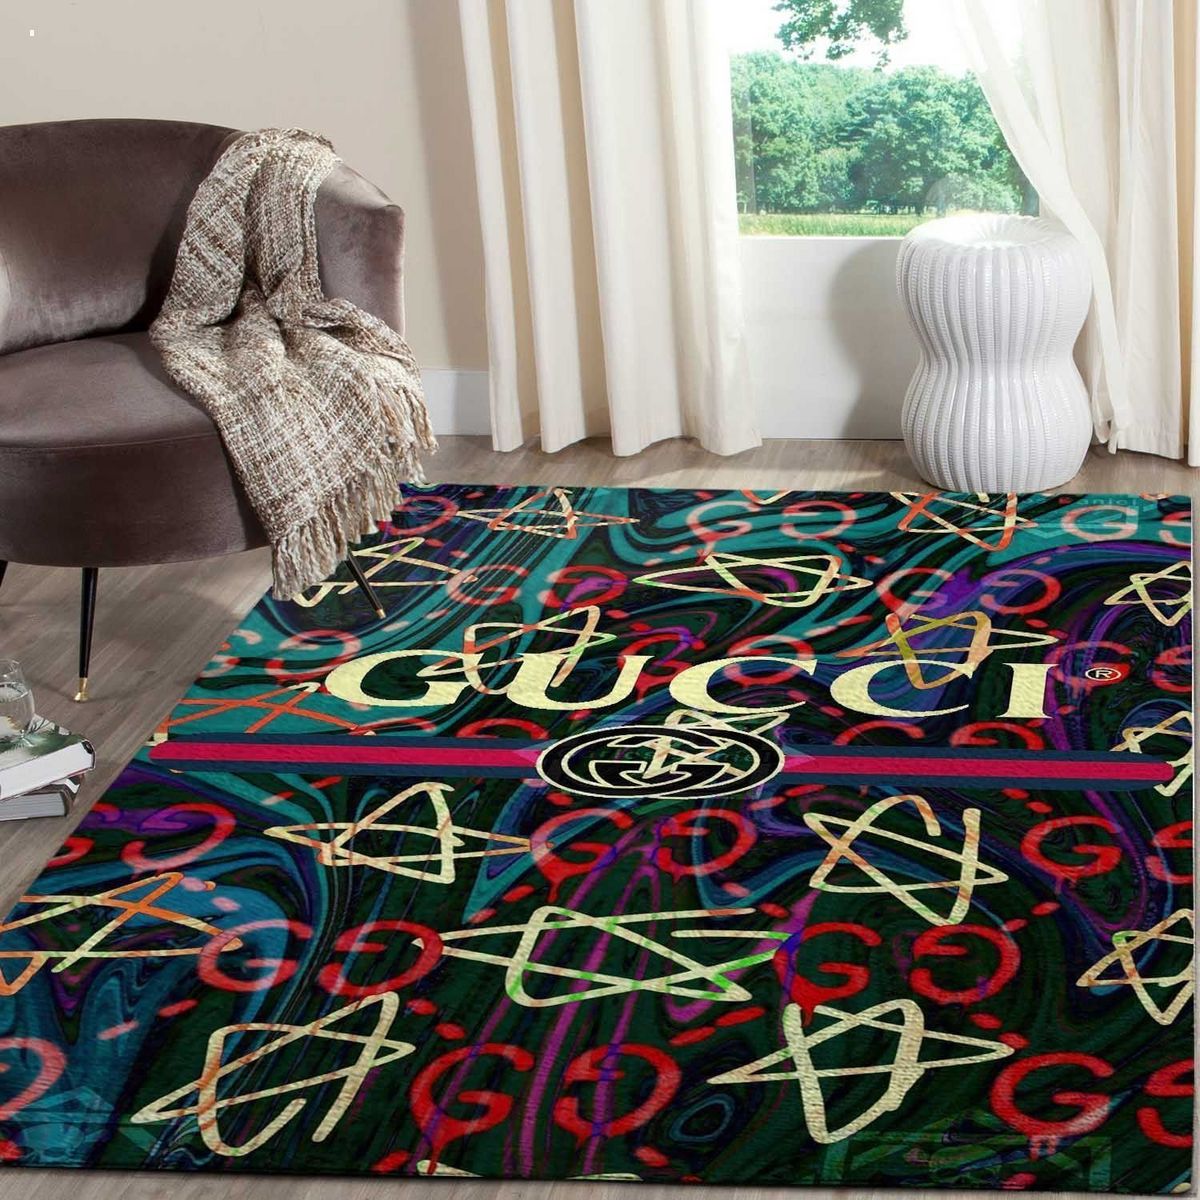 Gucci Srar Full Color Luxury Brand Carpet Rug Limited Edition